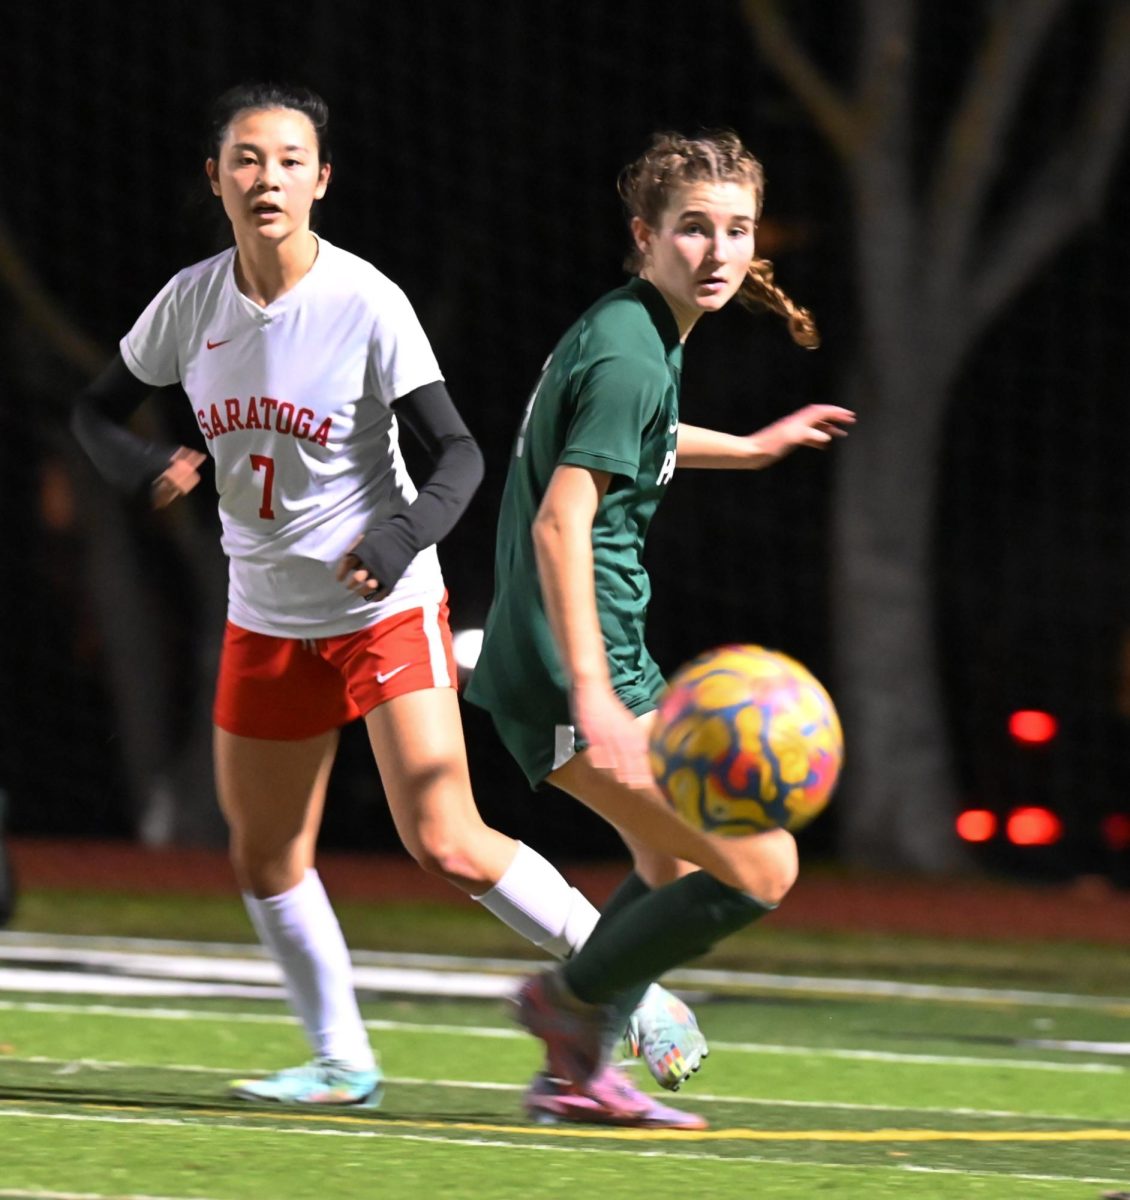 Palo Alto High School 9th grader left back Ellie Knott prepares to run after the ball during the girls varsity soccer game on Tuesday at home. The Vikings won, 2-1, against the Falcons, keeping the Vikings at third in the league. According to Viking sophomore center back Reyes Aronson, the Vikings play solidly as a unified team. I feel like our team together as a whole played really good, Aronson said. We were switching it really well, keeping the ball, ... doing things we should be doing. (Photo: Andrew Zhao)